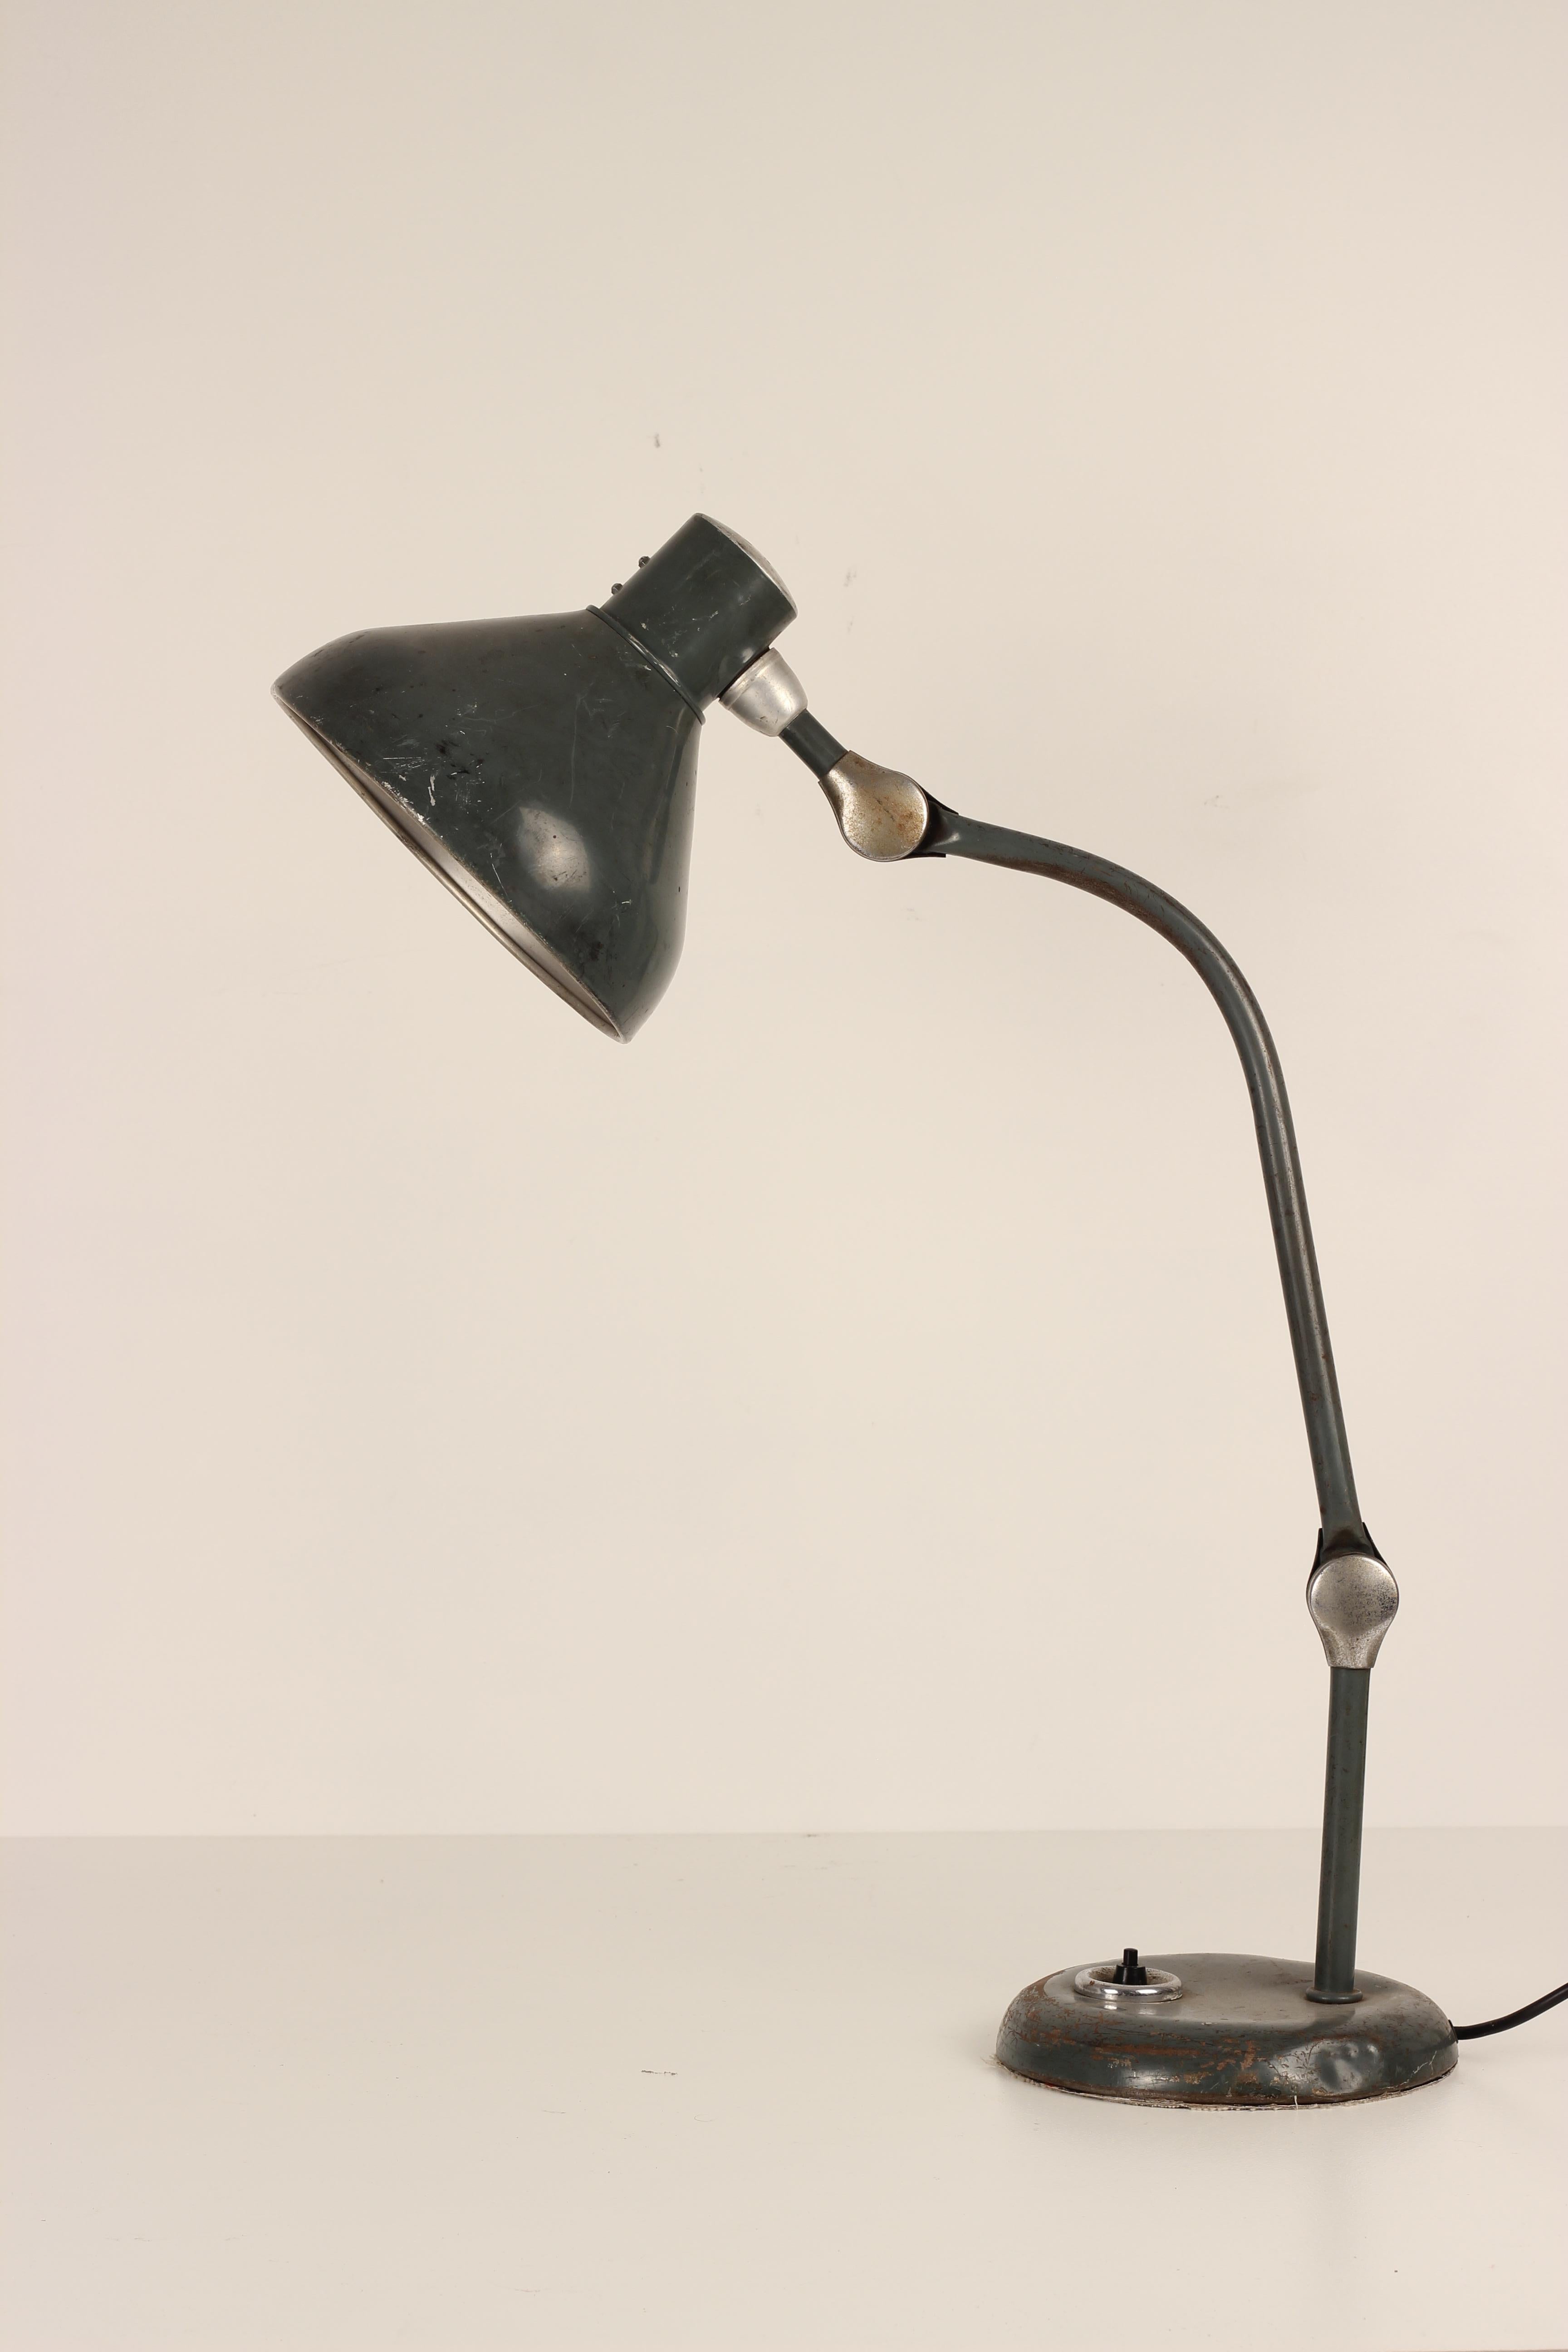 A mid century Industrial desk lamp, which has age related wear but still retains its original paint finish. Fully adjustable to many positions as shown in the images, the light makes for a very practical solution for a flexible work light. Sourced